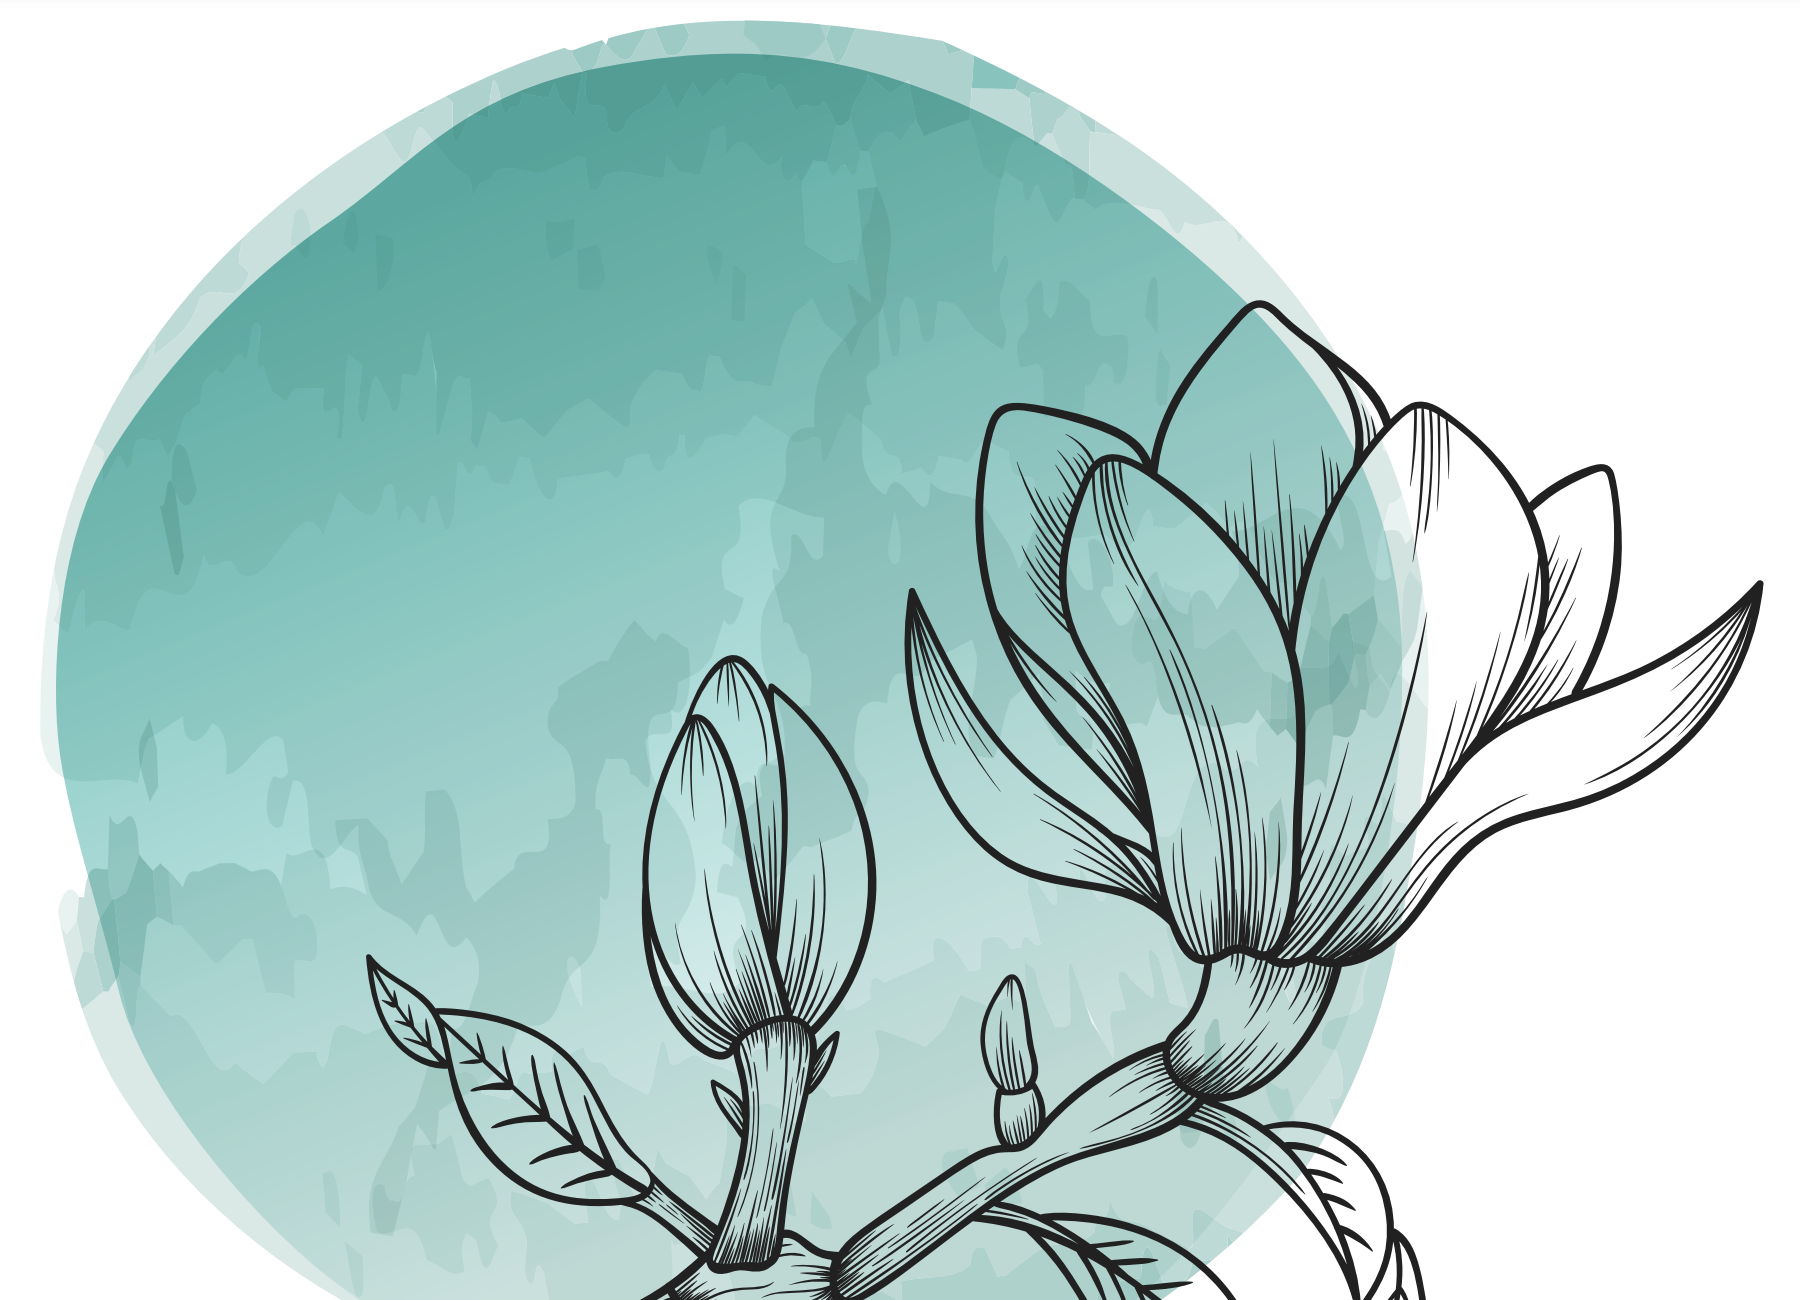 A line drawing of a flower with opening petals silhouetted against a pale green circle in the background.